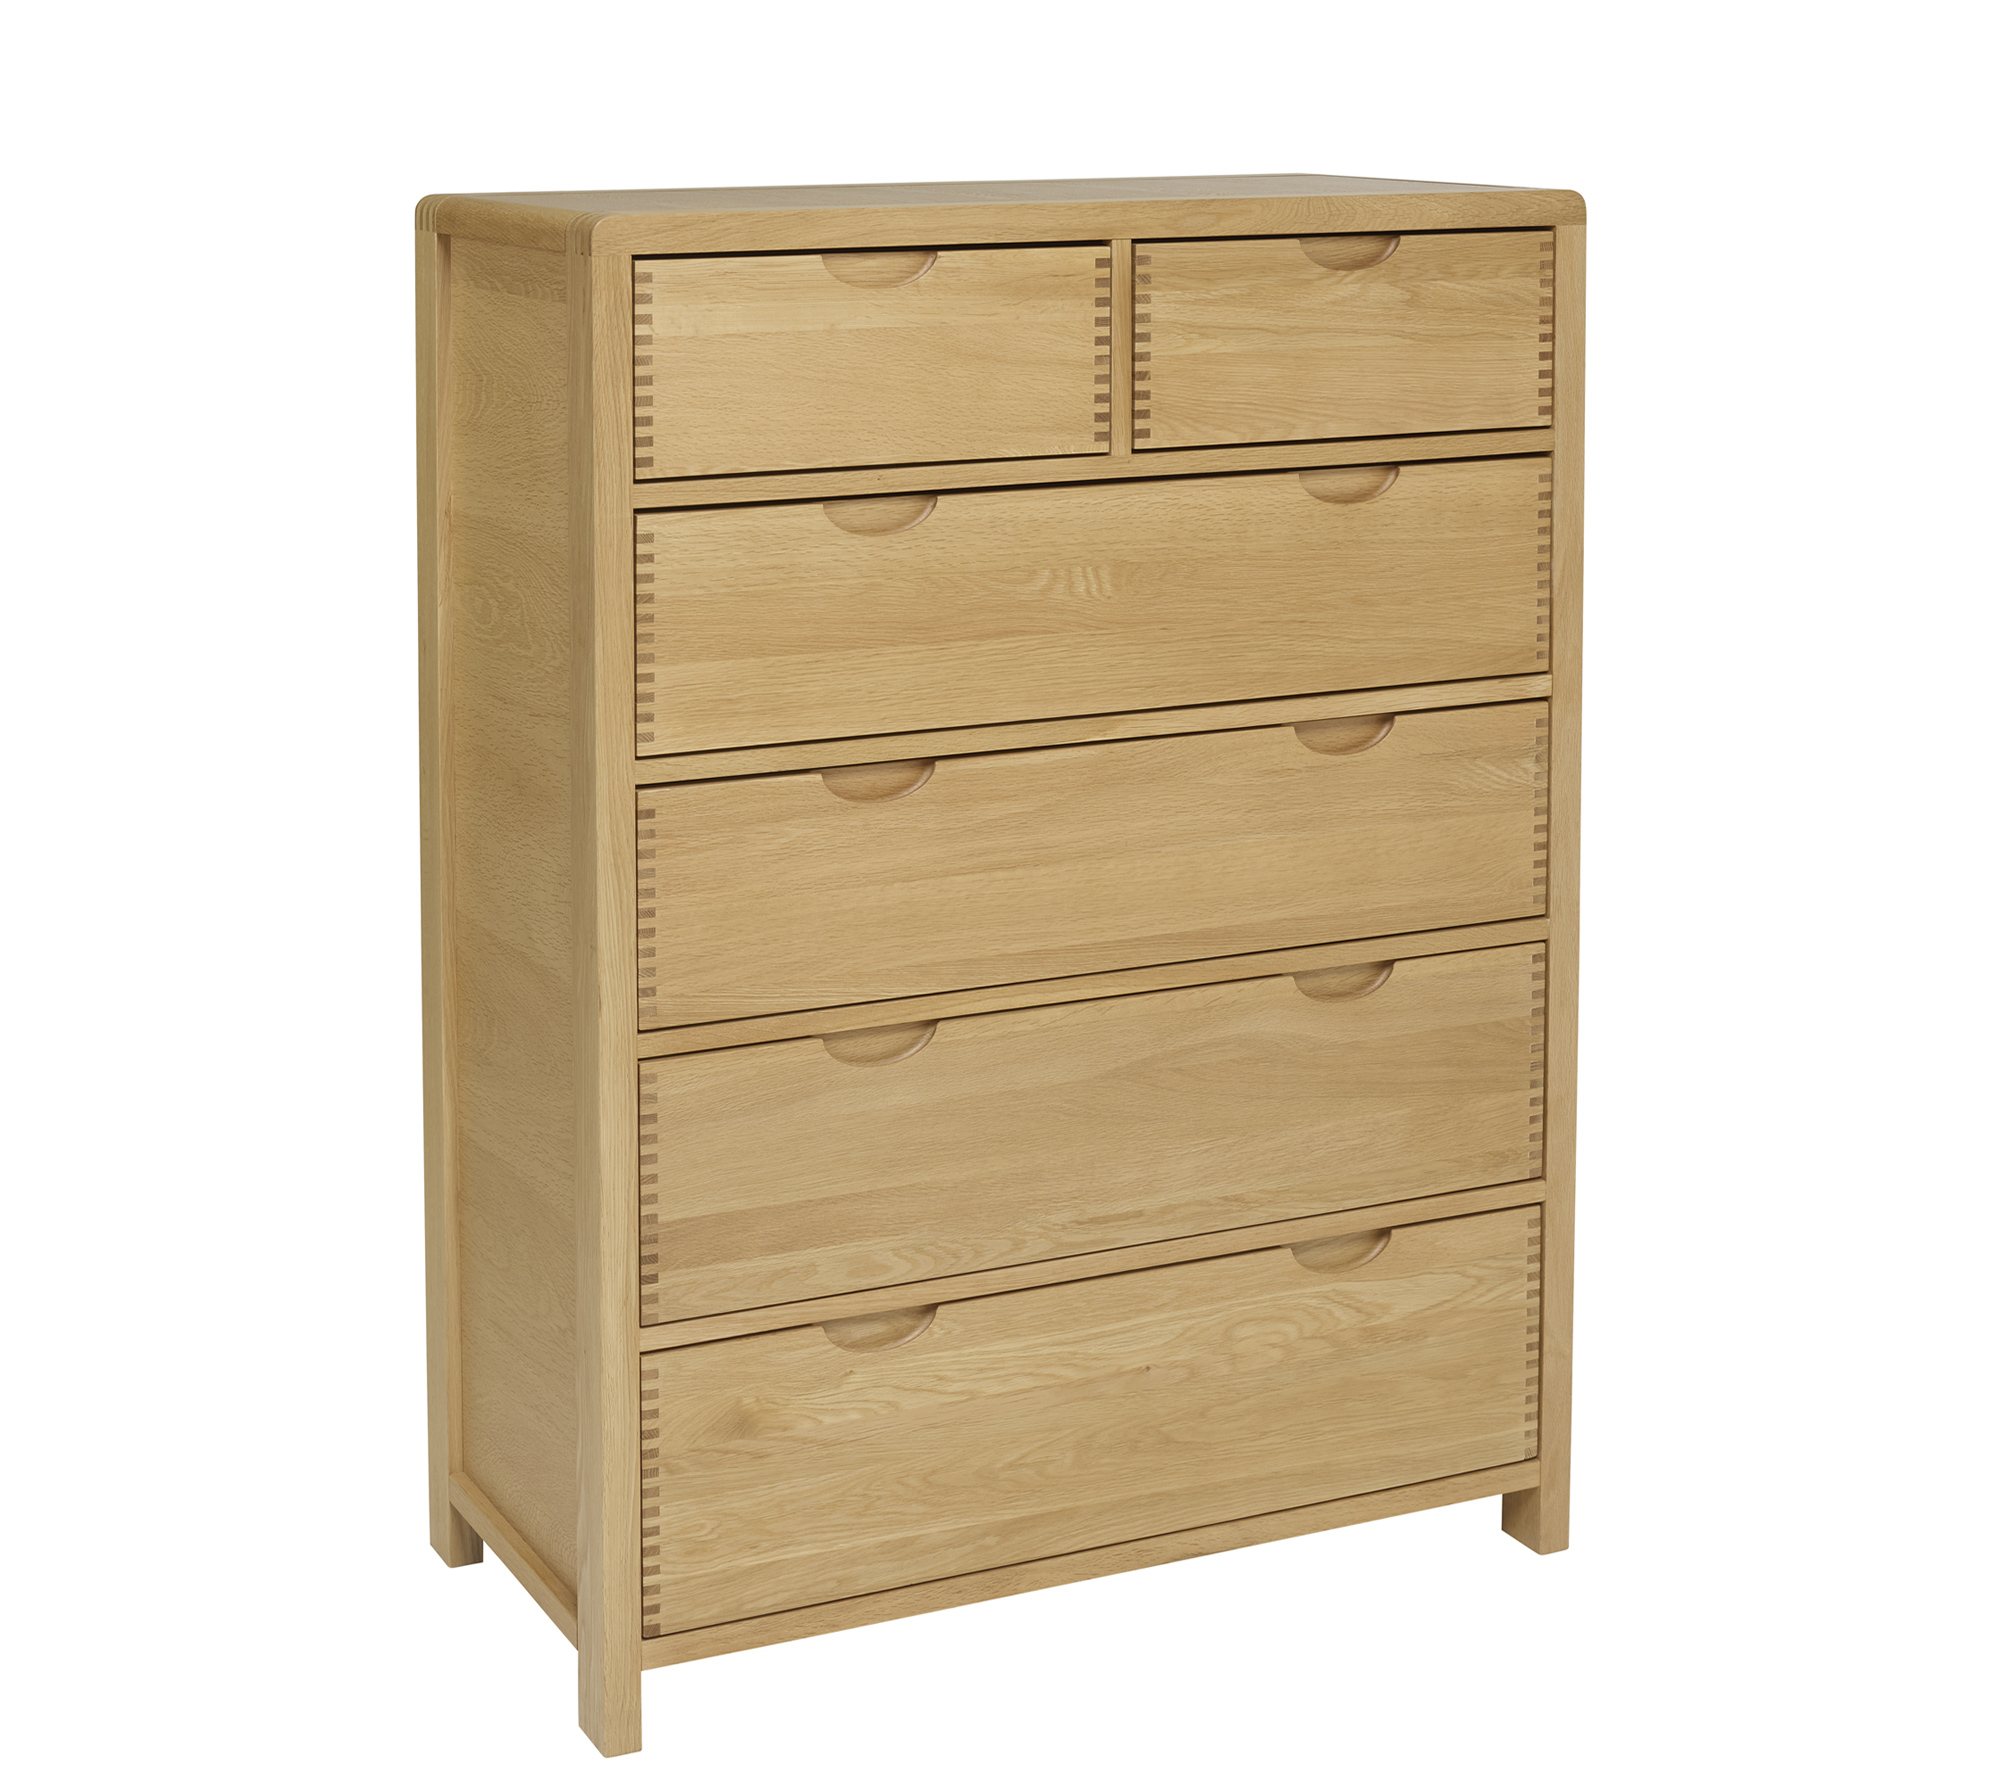 Cm wide drawers